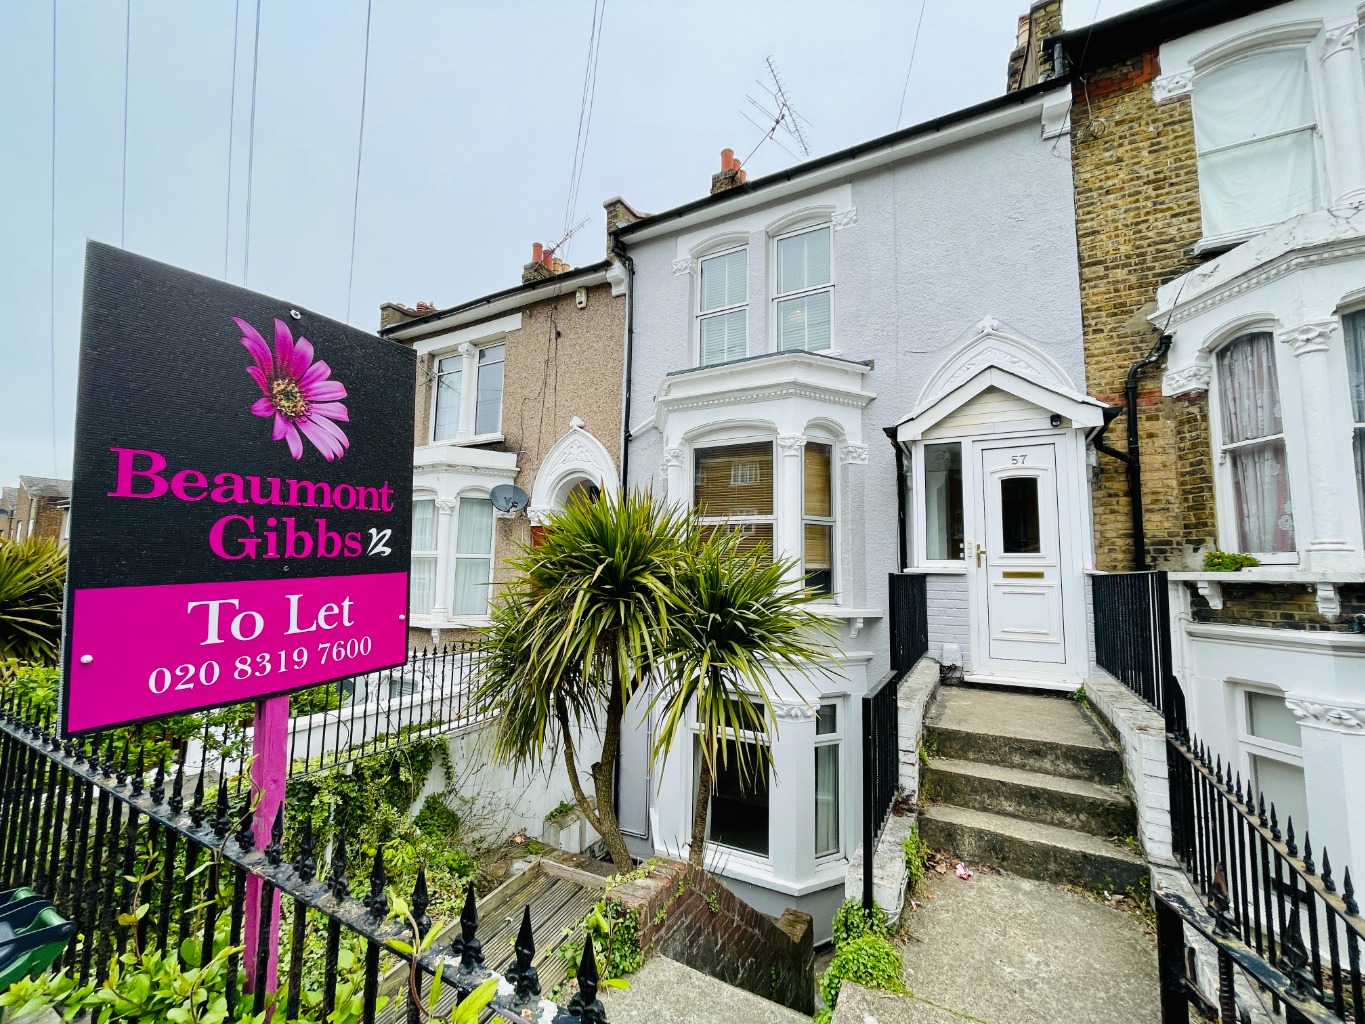 Beaumont Gibbs are offering this beautiful and very spacious one bedroomed lower ground floor maisonette to let. The flat is offered on an unfurnished basis, but with all the white goods to remain.